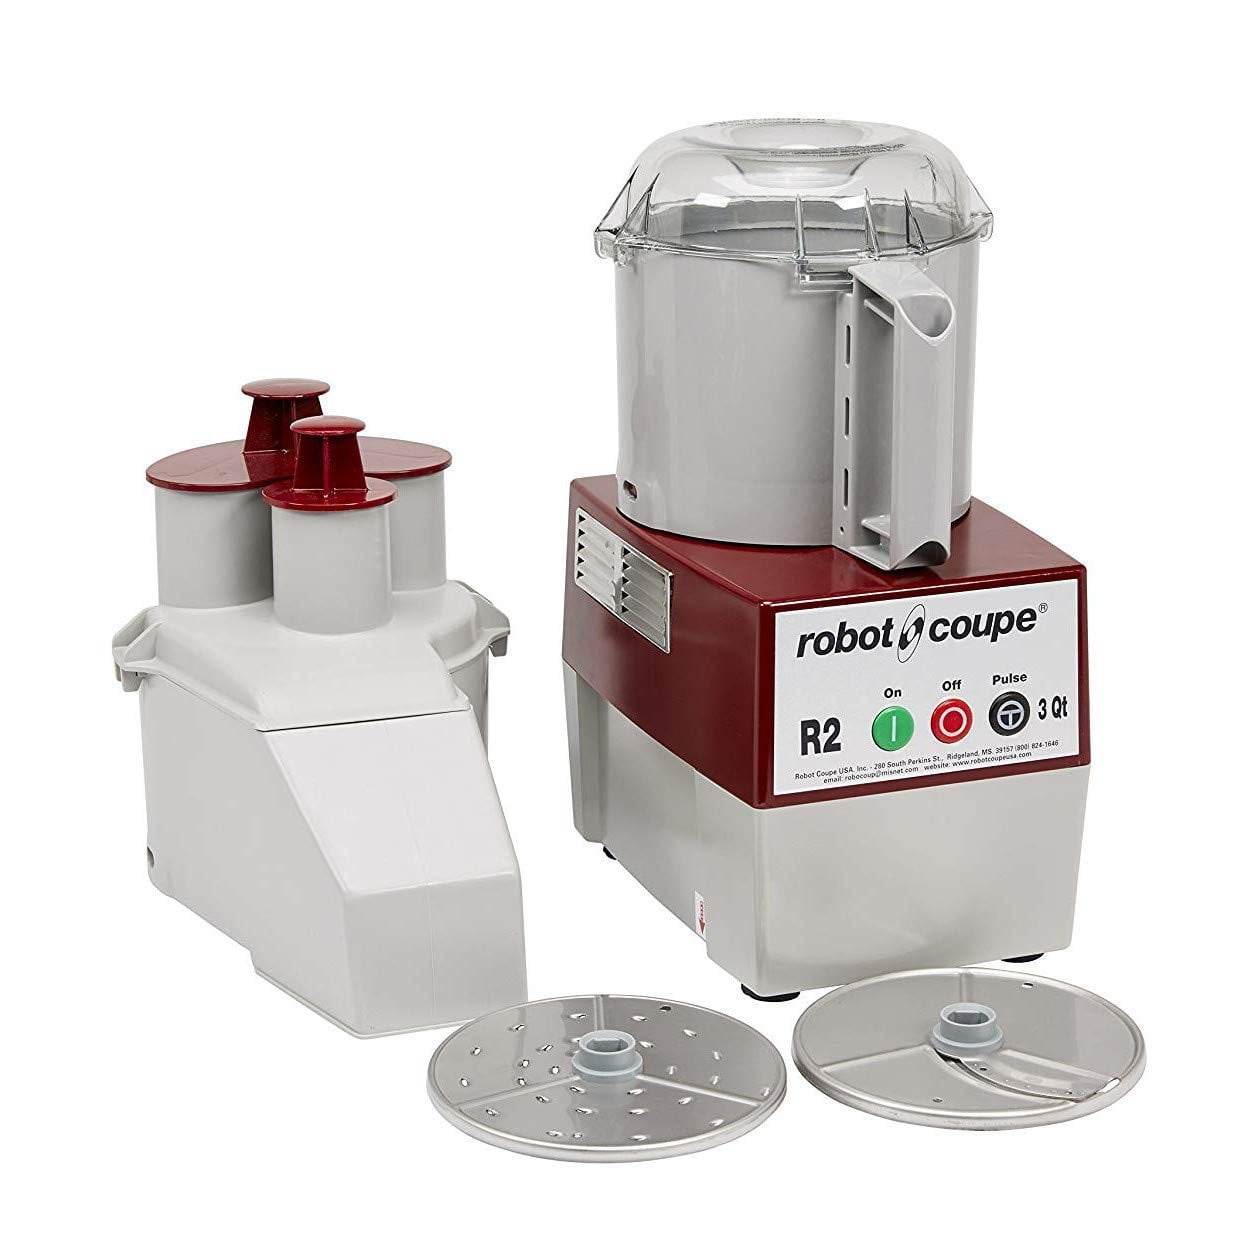 Robot Coupe - R2N - 3 L HP Continuous Feed Food Processor - Walmart.com